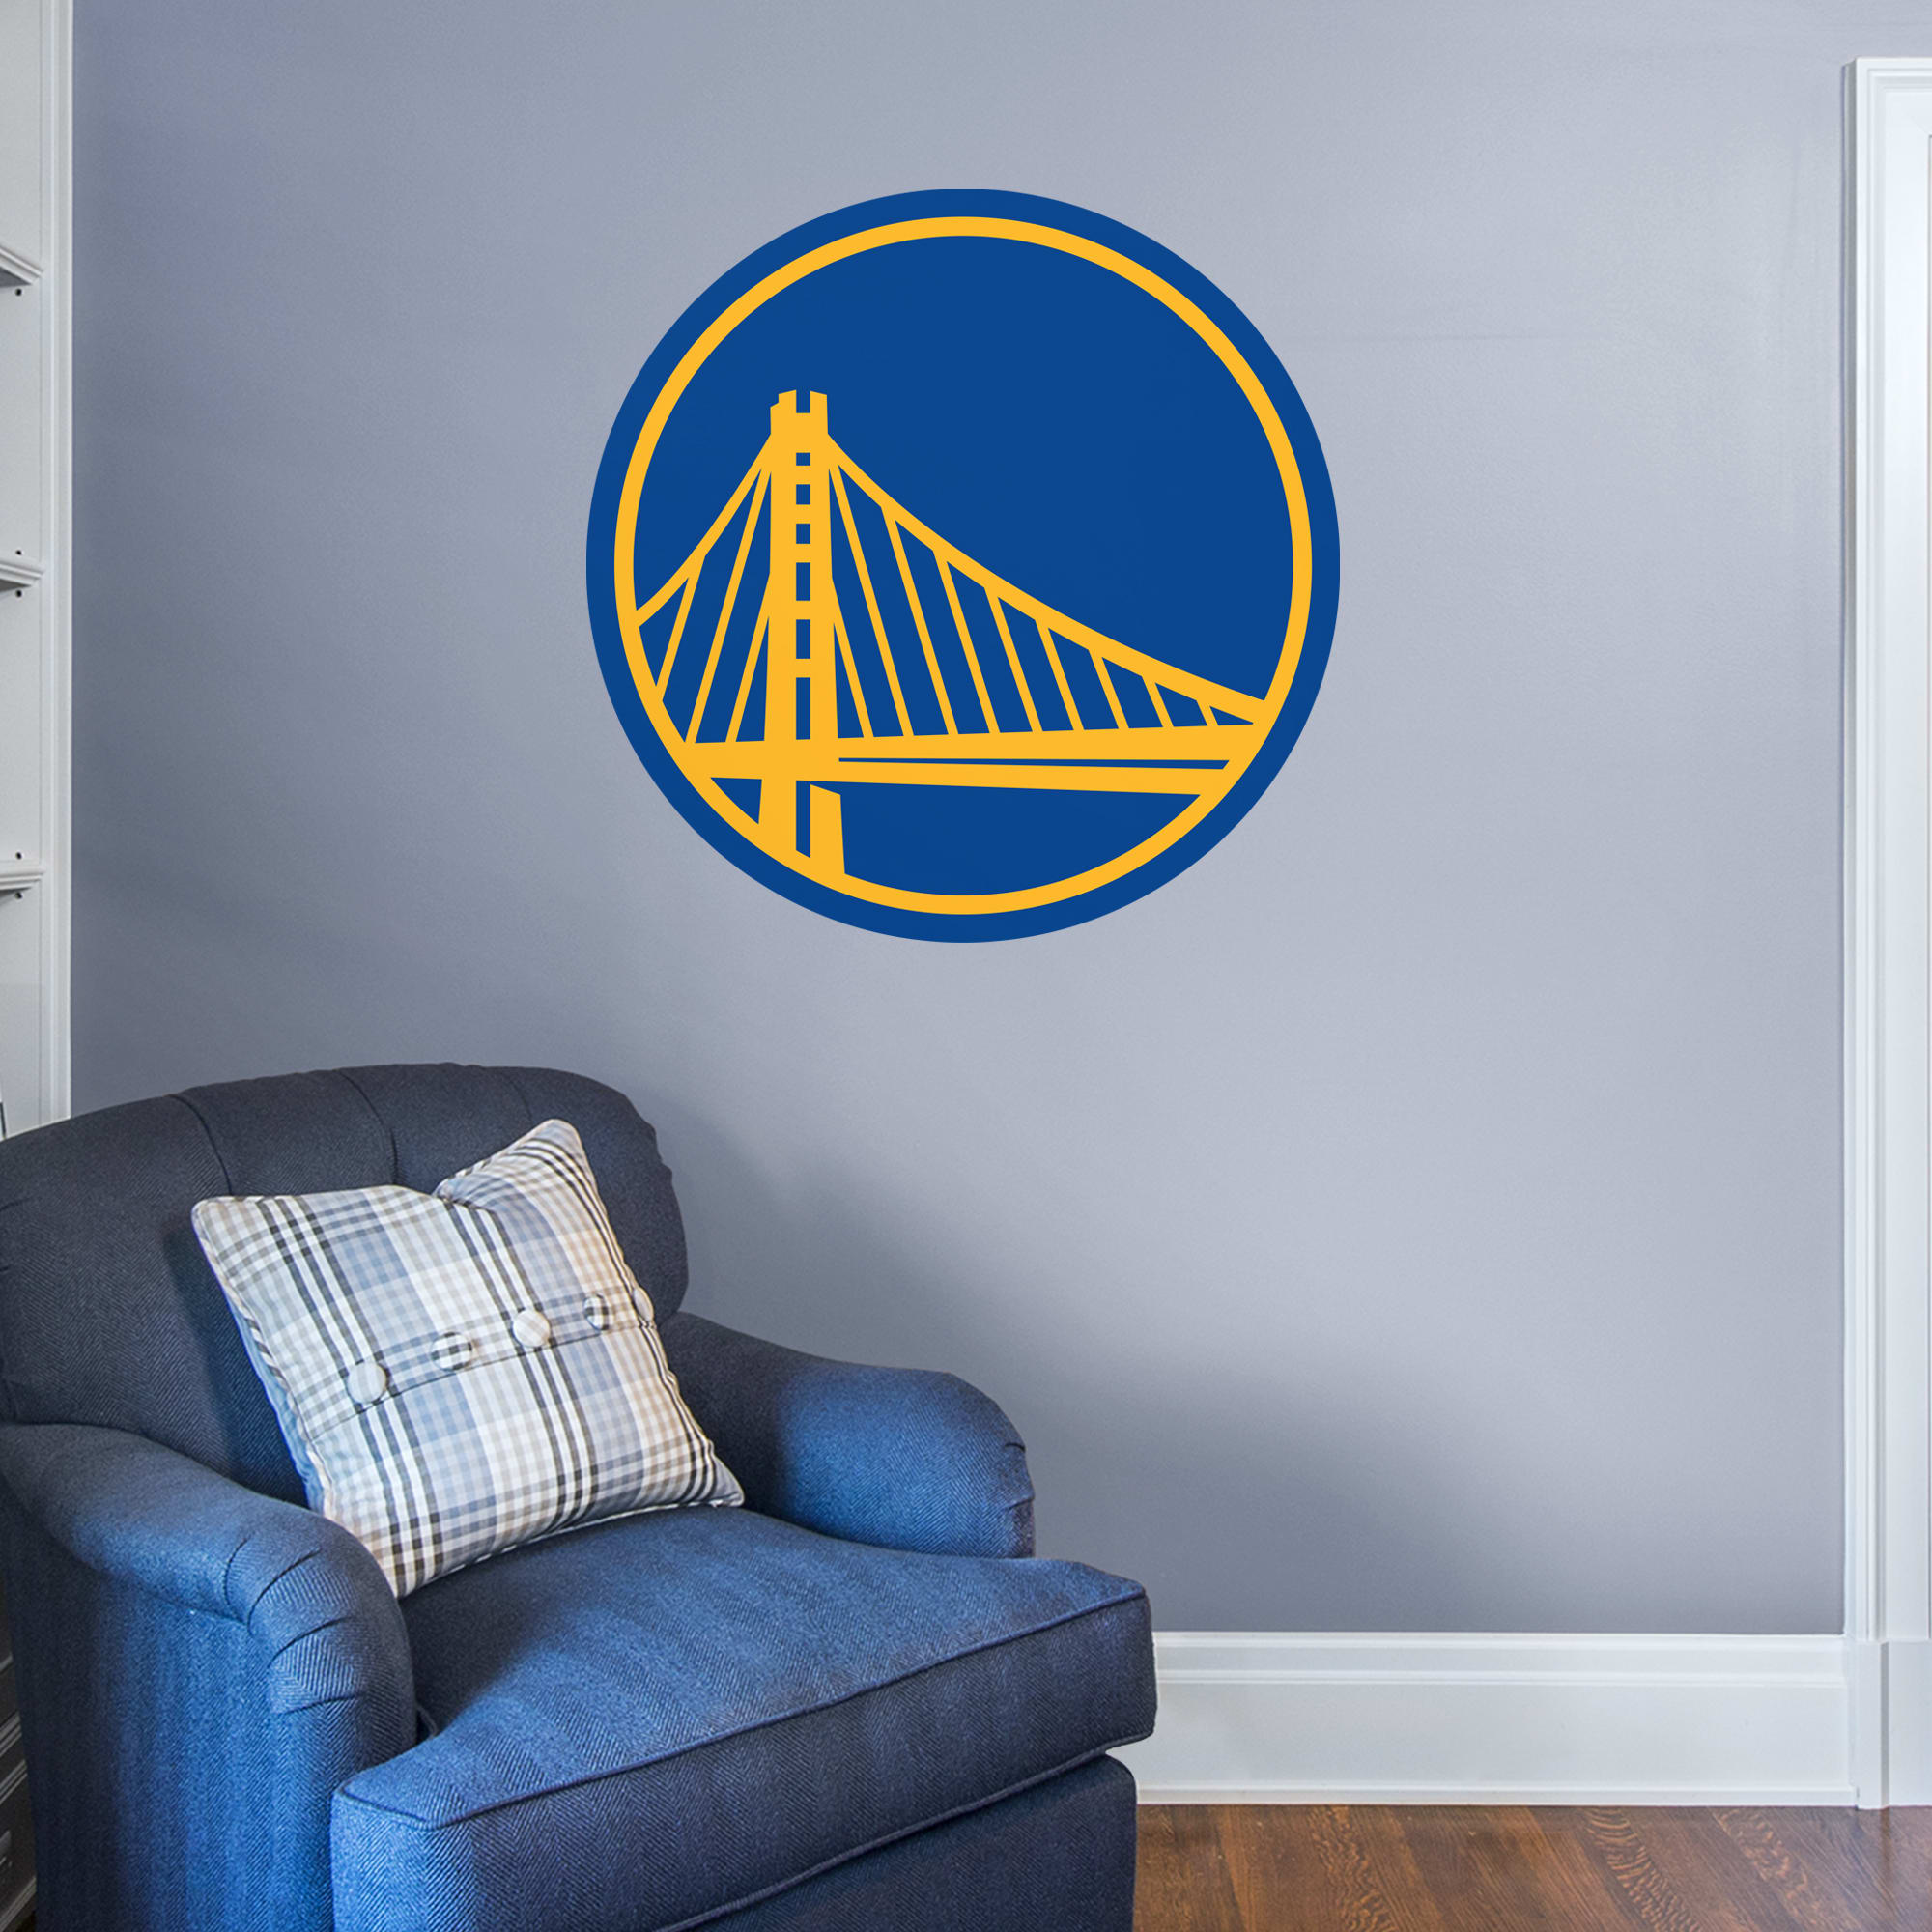 Golden State Warriors: Logo - Officially Licensed NBA Removable Wall Decal Giant Logo (38.5"W x 38.5"H) by Fathead | Vinyl